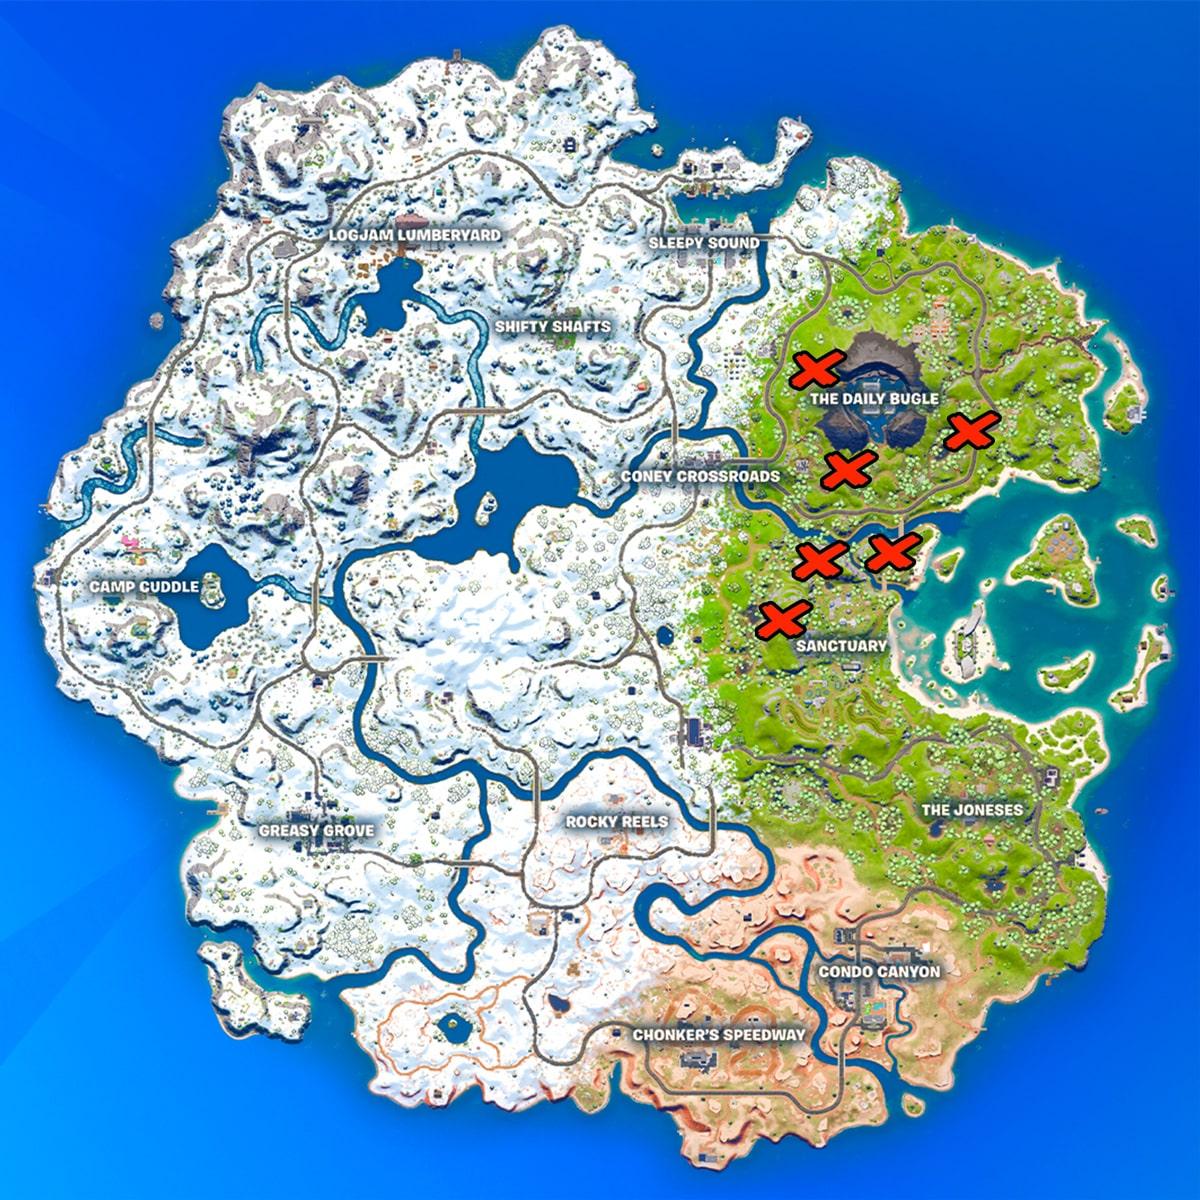 Tall Grass locations marked on the Fortnite Chapter 3 map